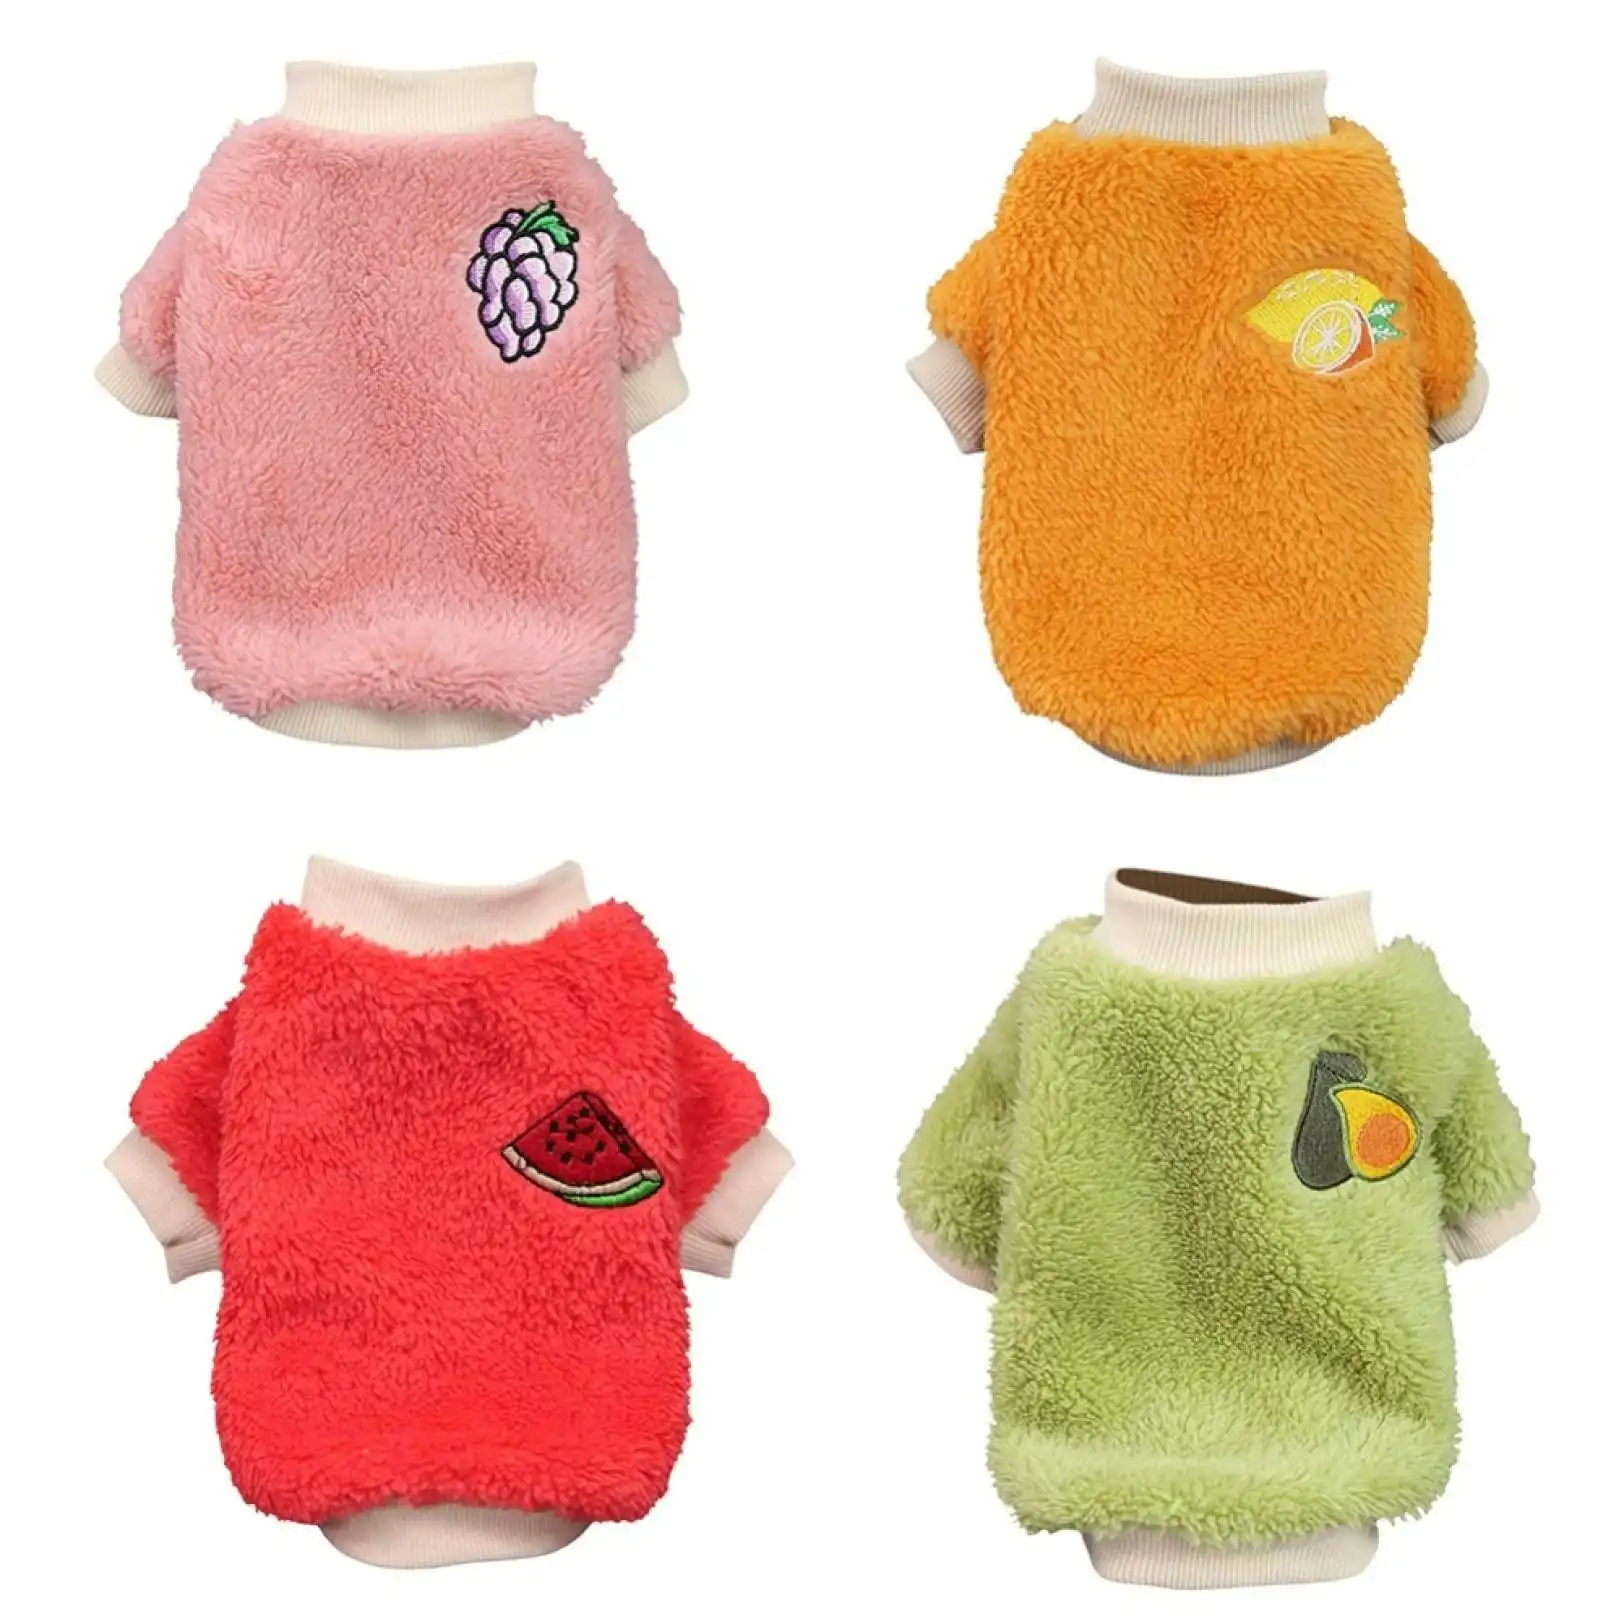 L Puppy Pet Dog Fleece Warm Jumper Sweater Coat Small Yorkie Chihuahua Cat Clothes